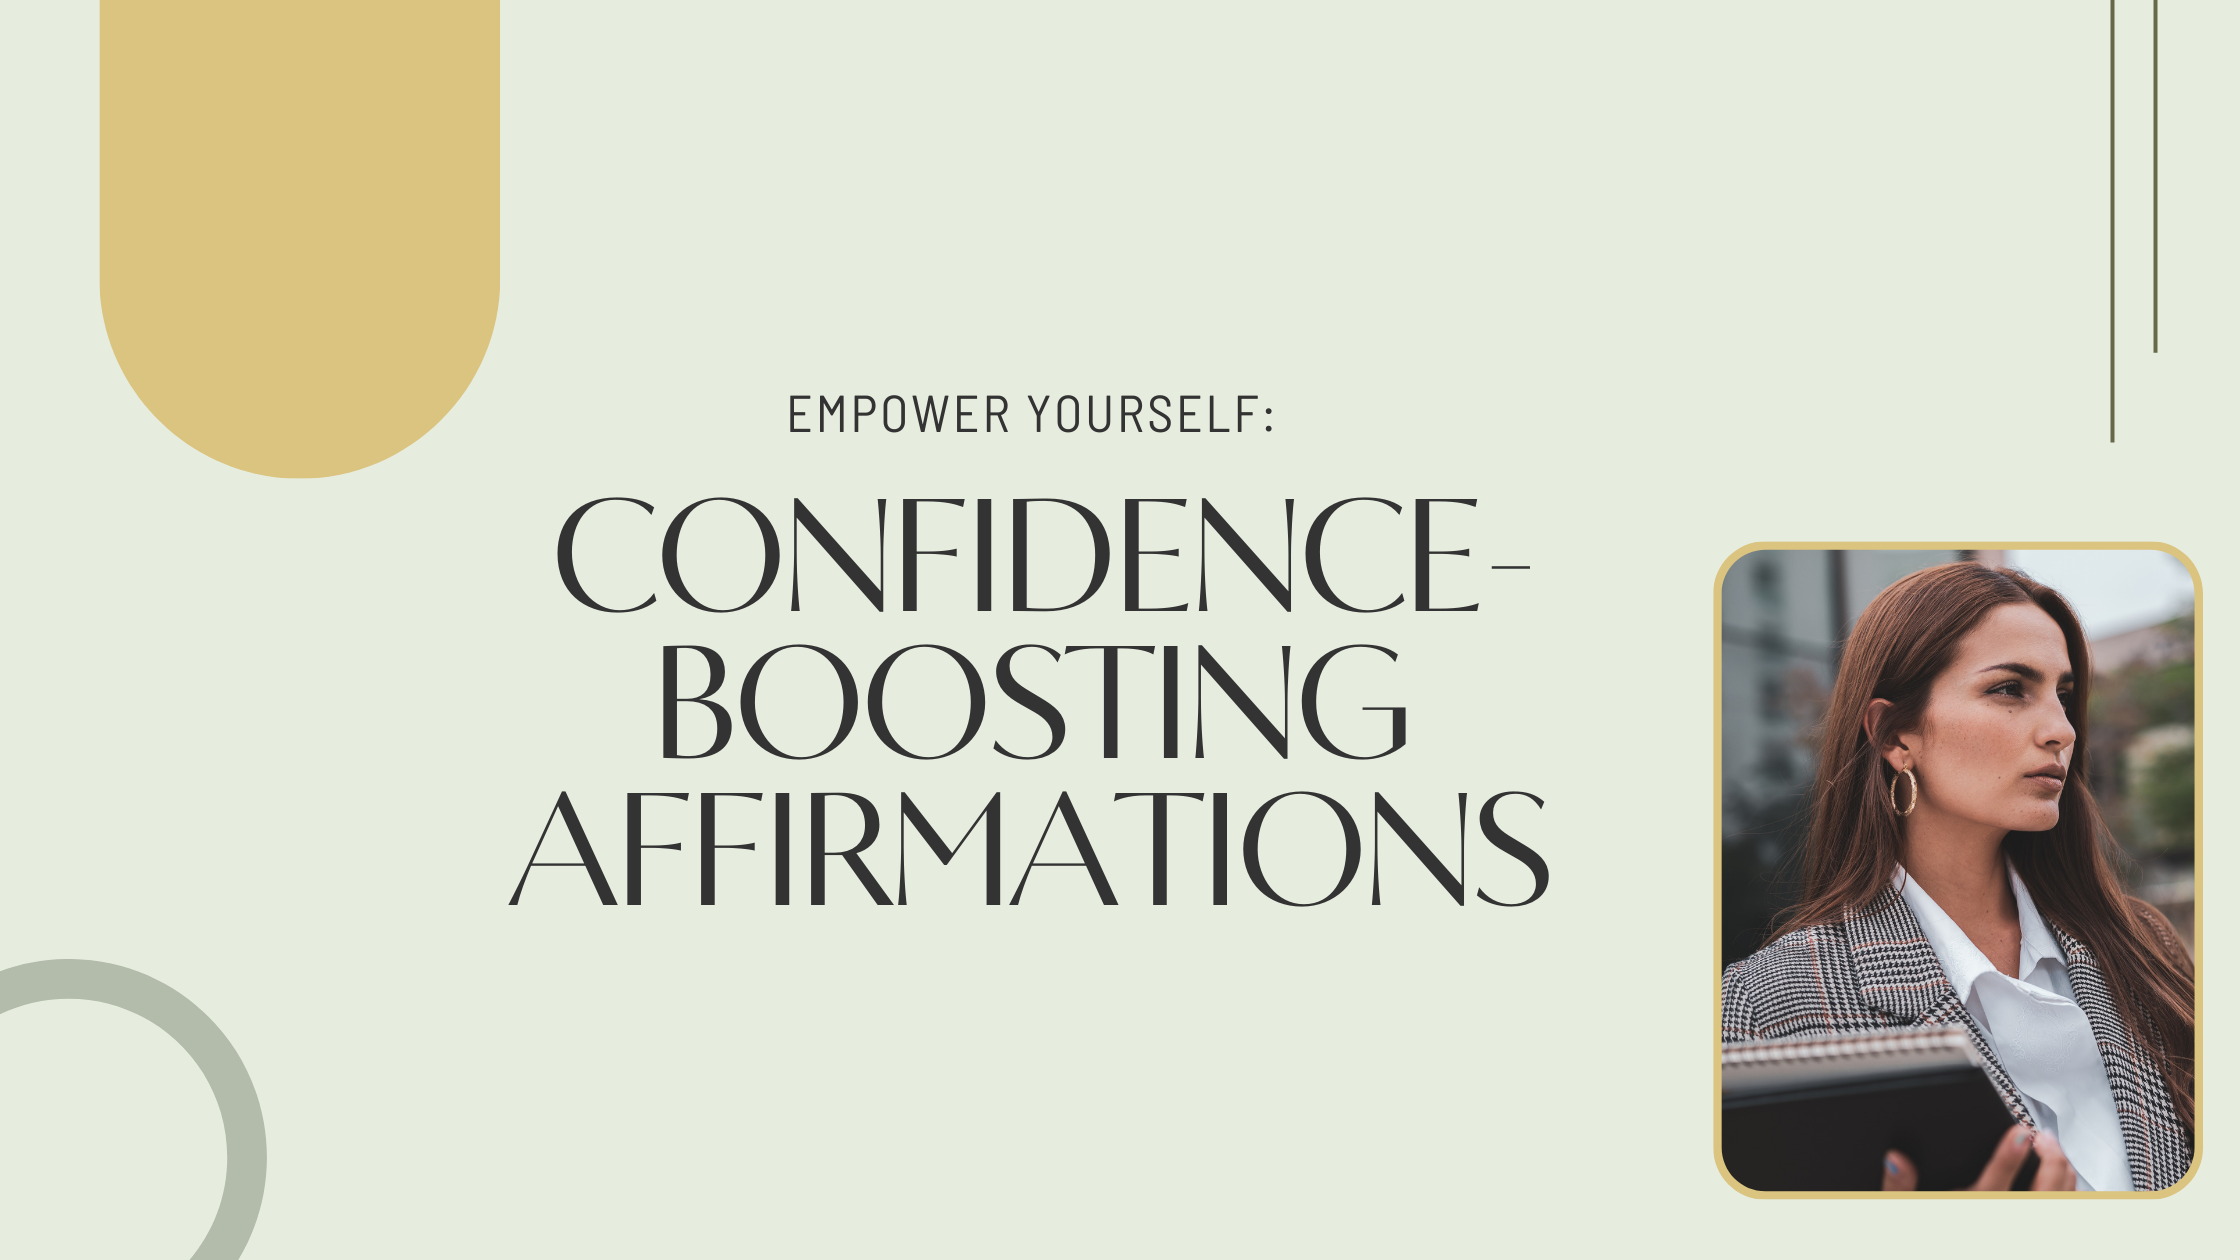 Affirmations for Confidence Before a Big Event